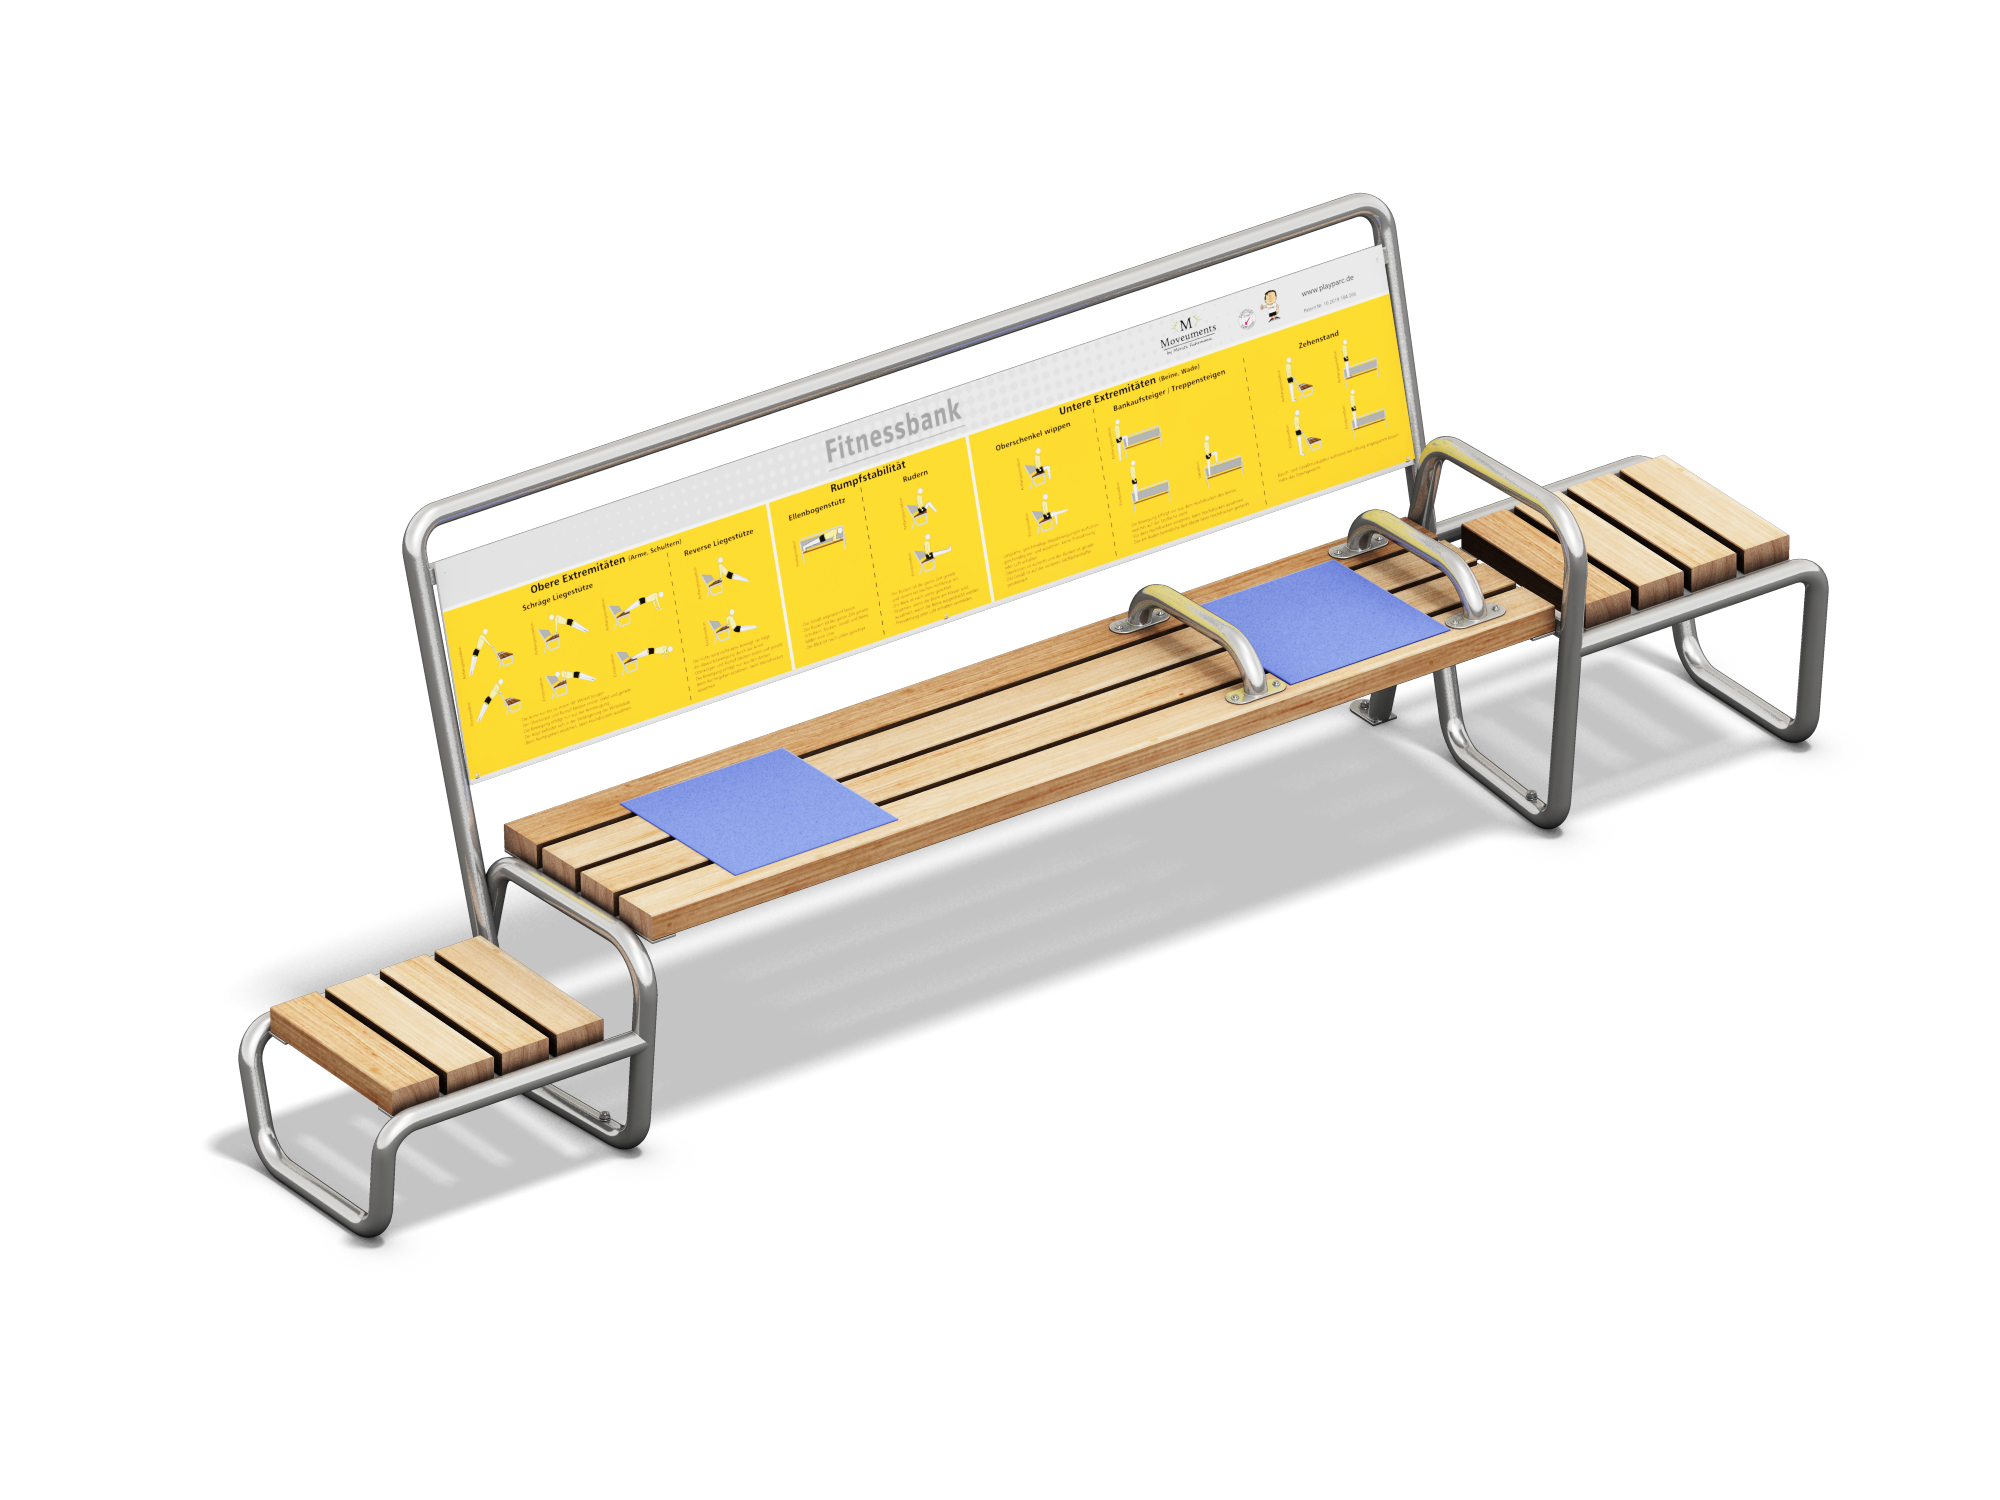 FITNESS BENCH 2.0/school All in